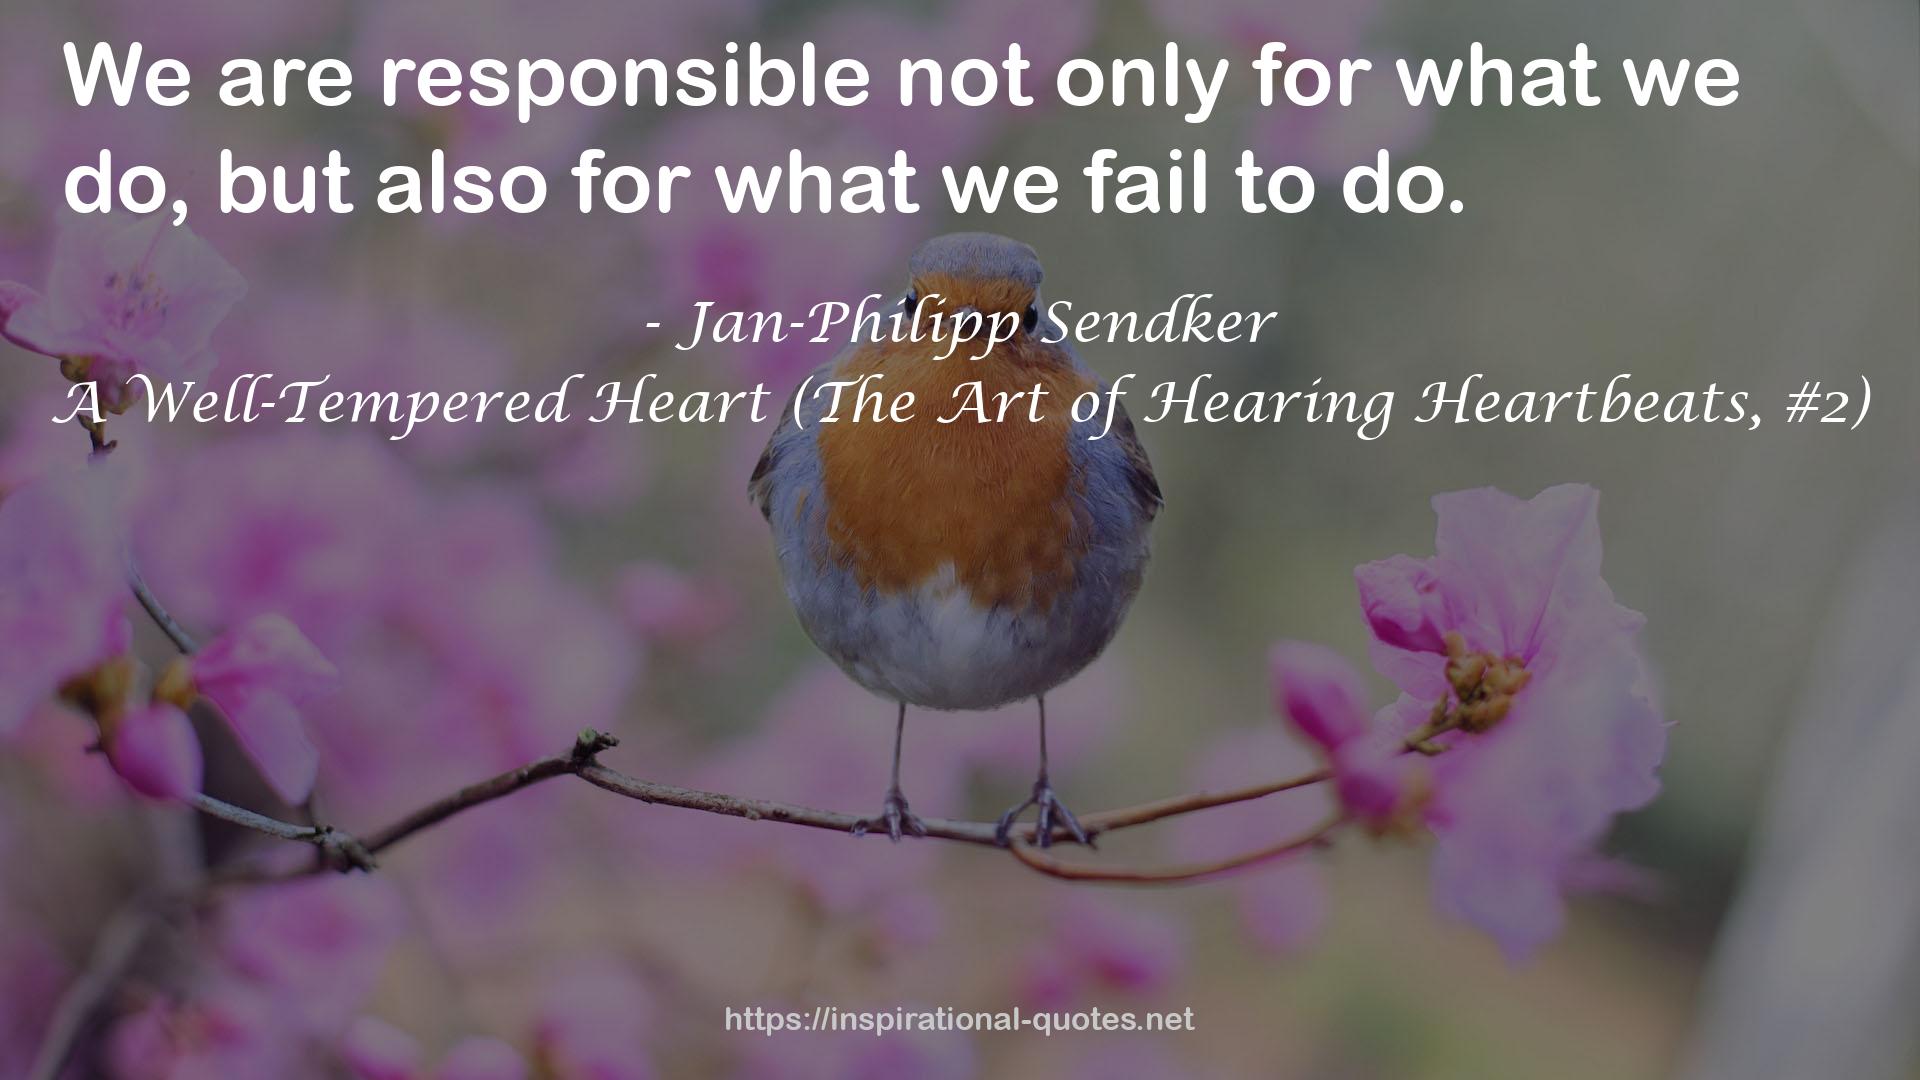 A Well-Tempered Heart (The Art of Hearing Heartbeats, #2) QUOTES